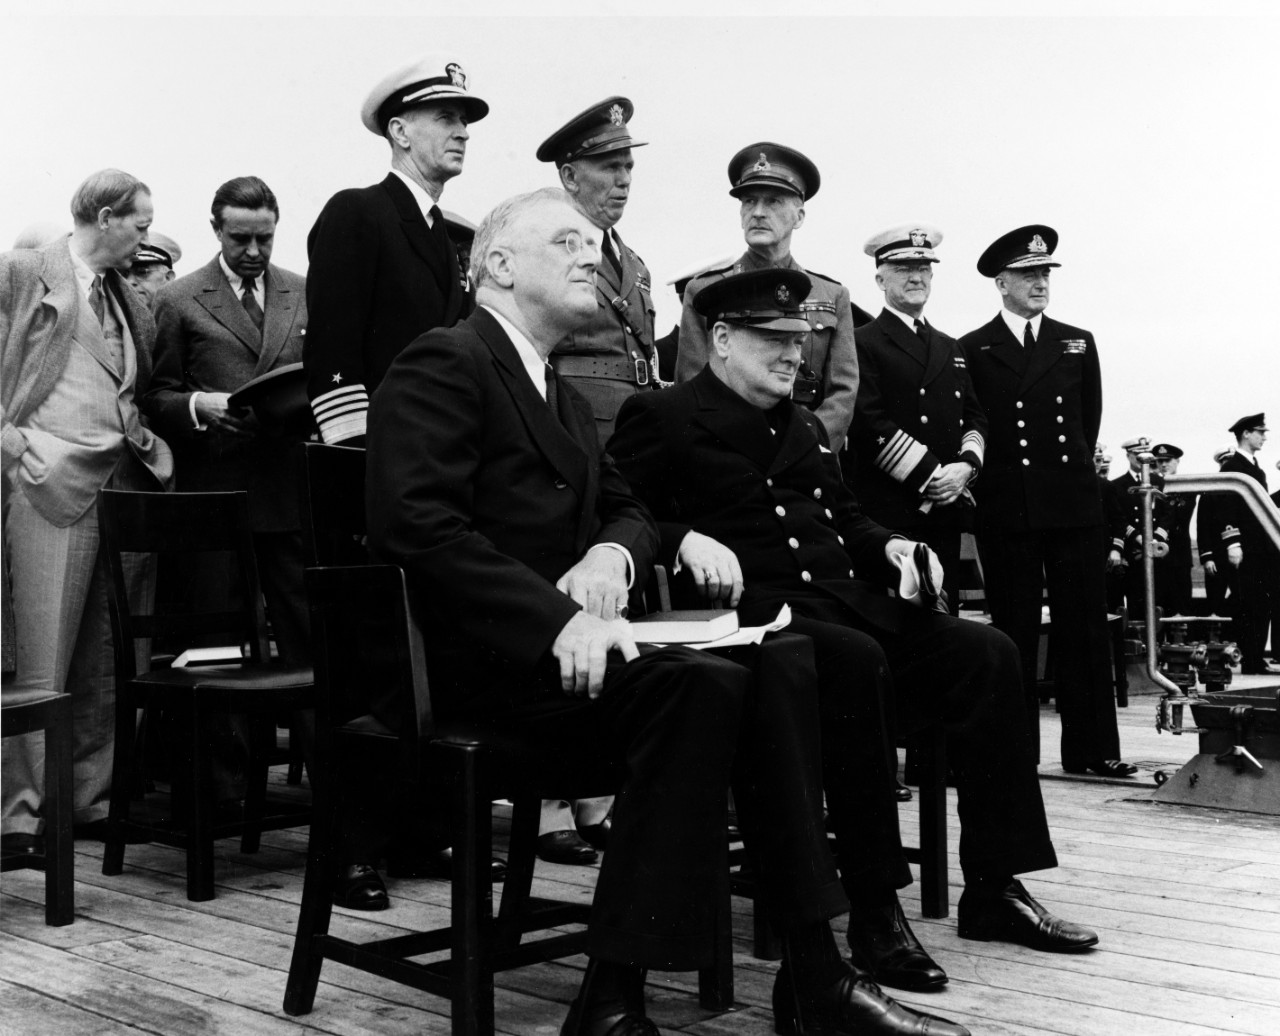 Photo #: NH 67209  Atlantic Charter Conference, 10-12 August 1941